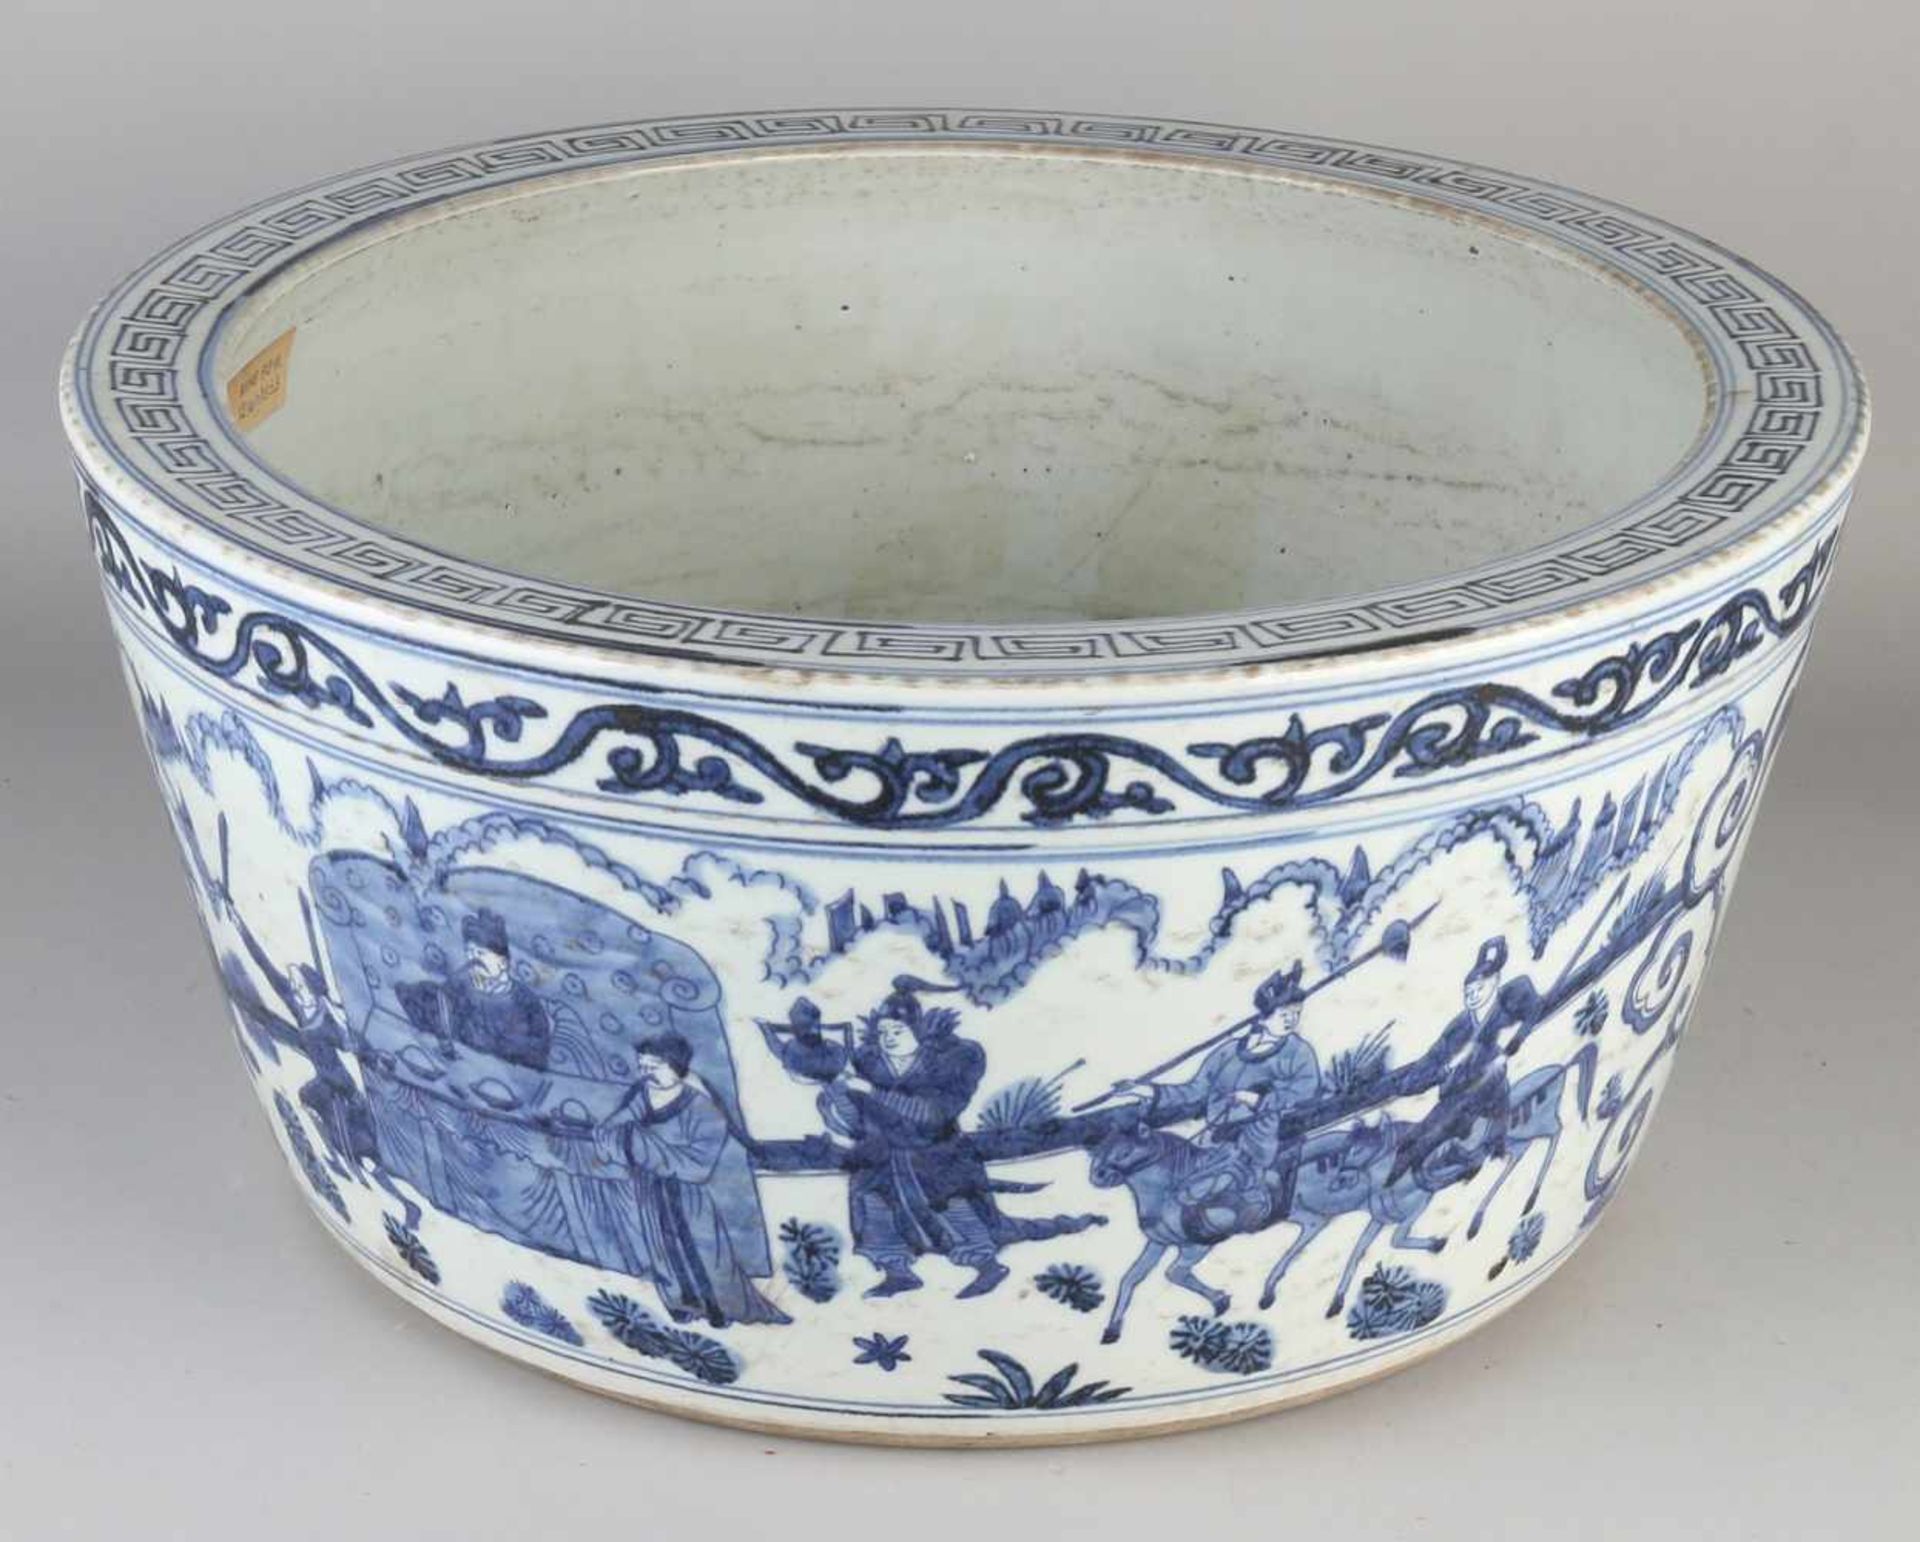 Very large Chinese porcelain pot with about Chinese characters and Chinese characters. Dimensions: H